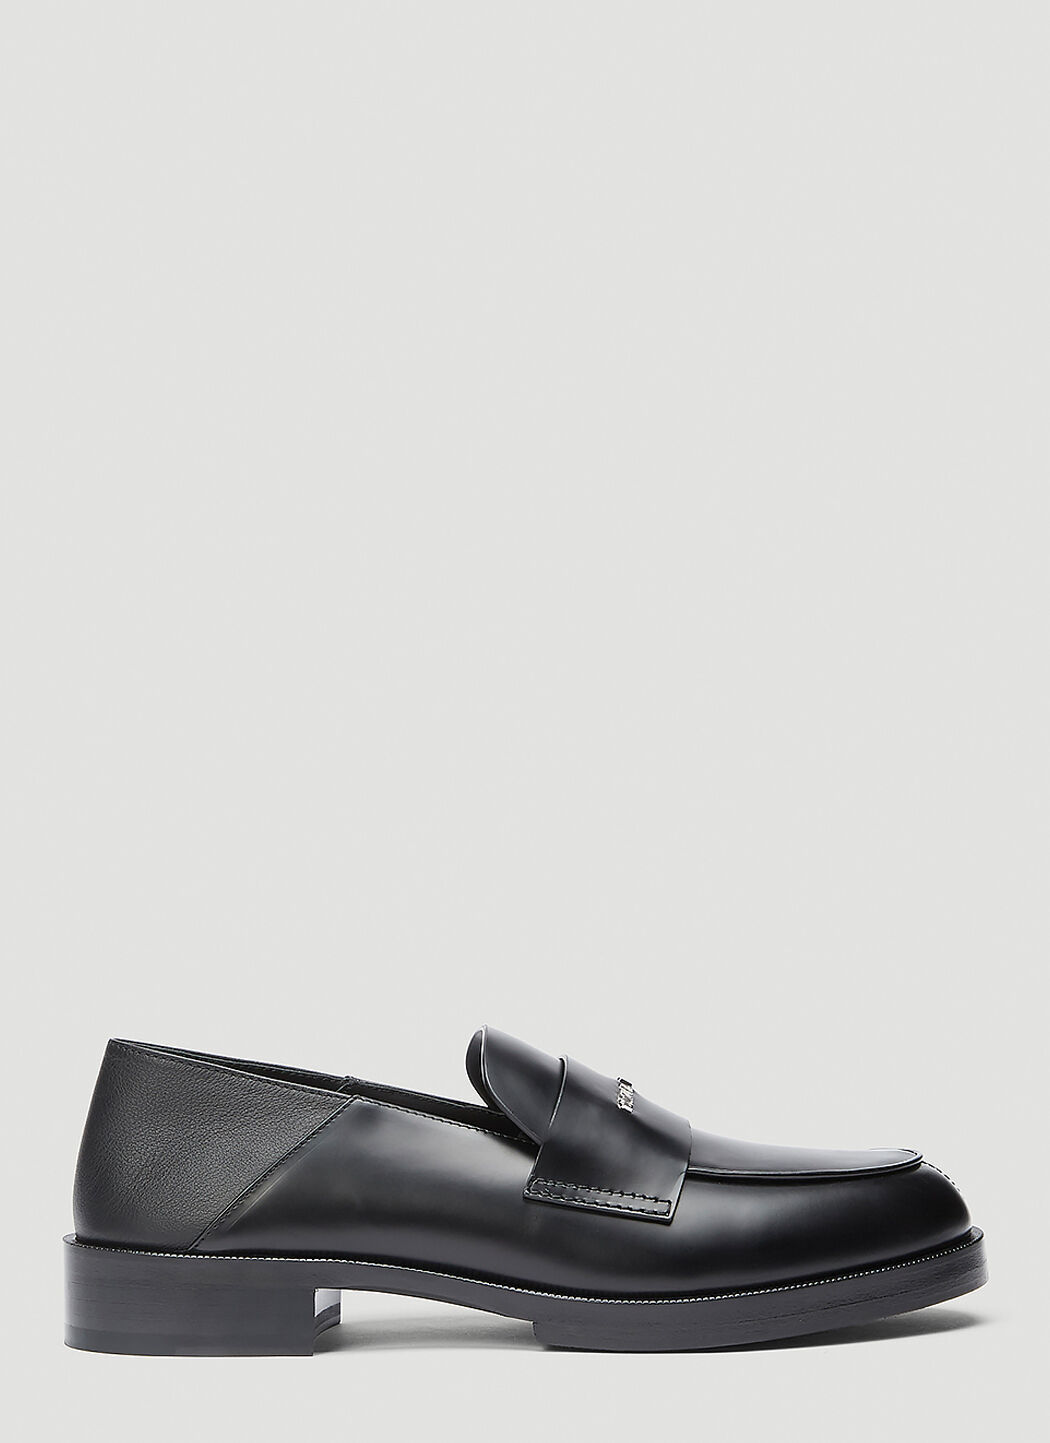 1017 ALYX 9SM Slip-On Leather Loafers 그레이 aly0152002